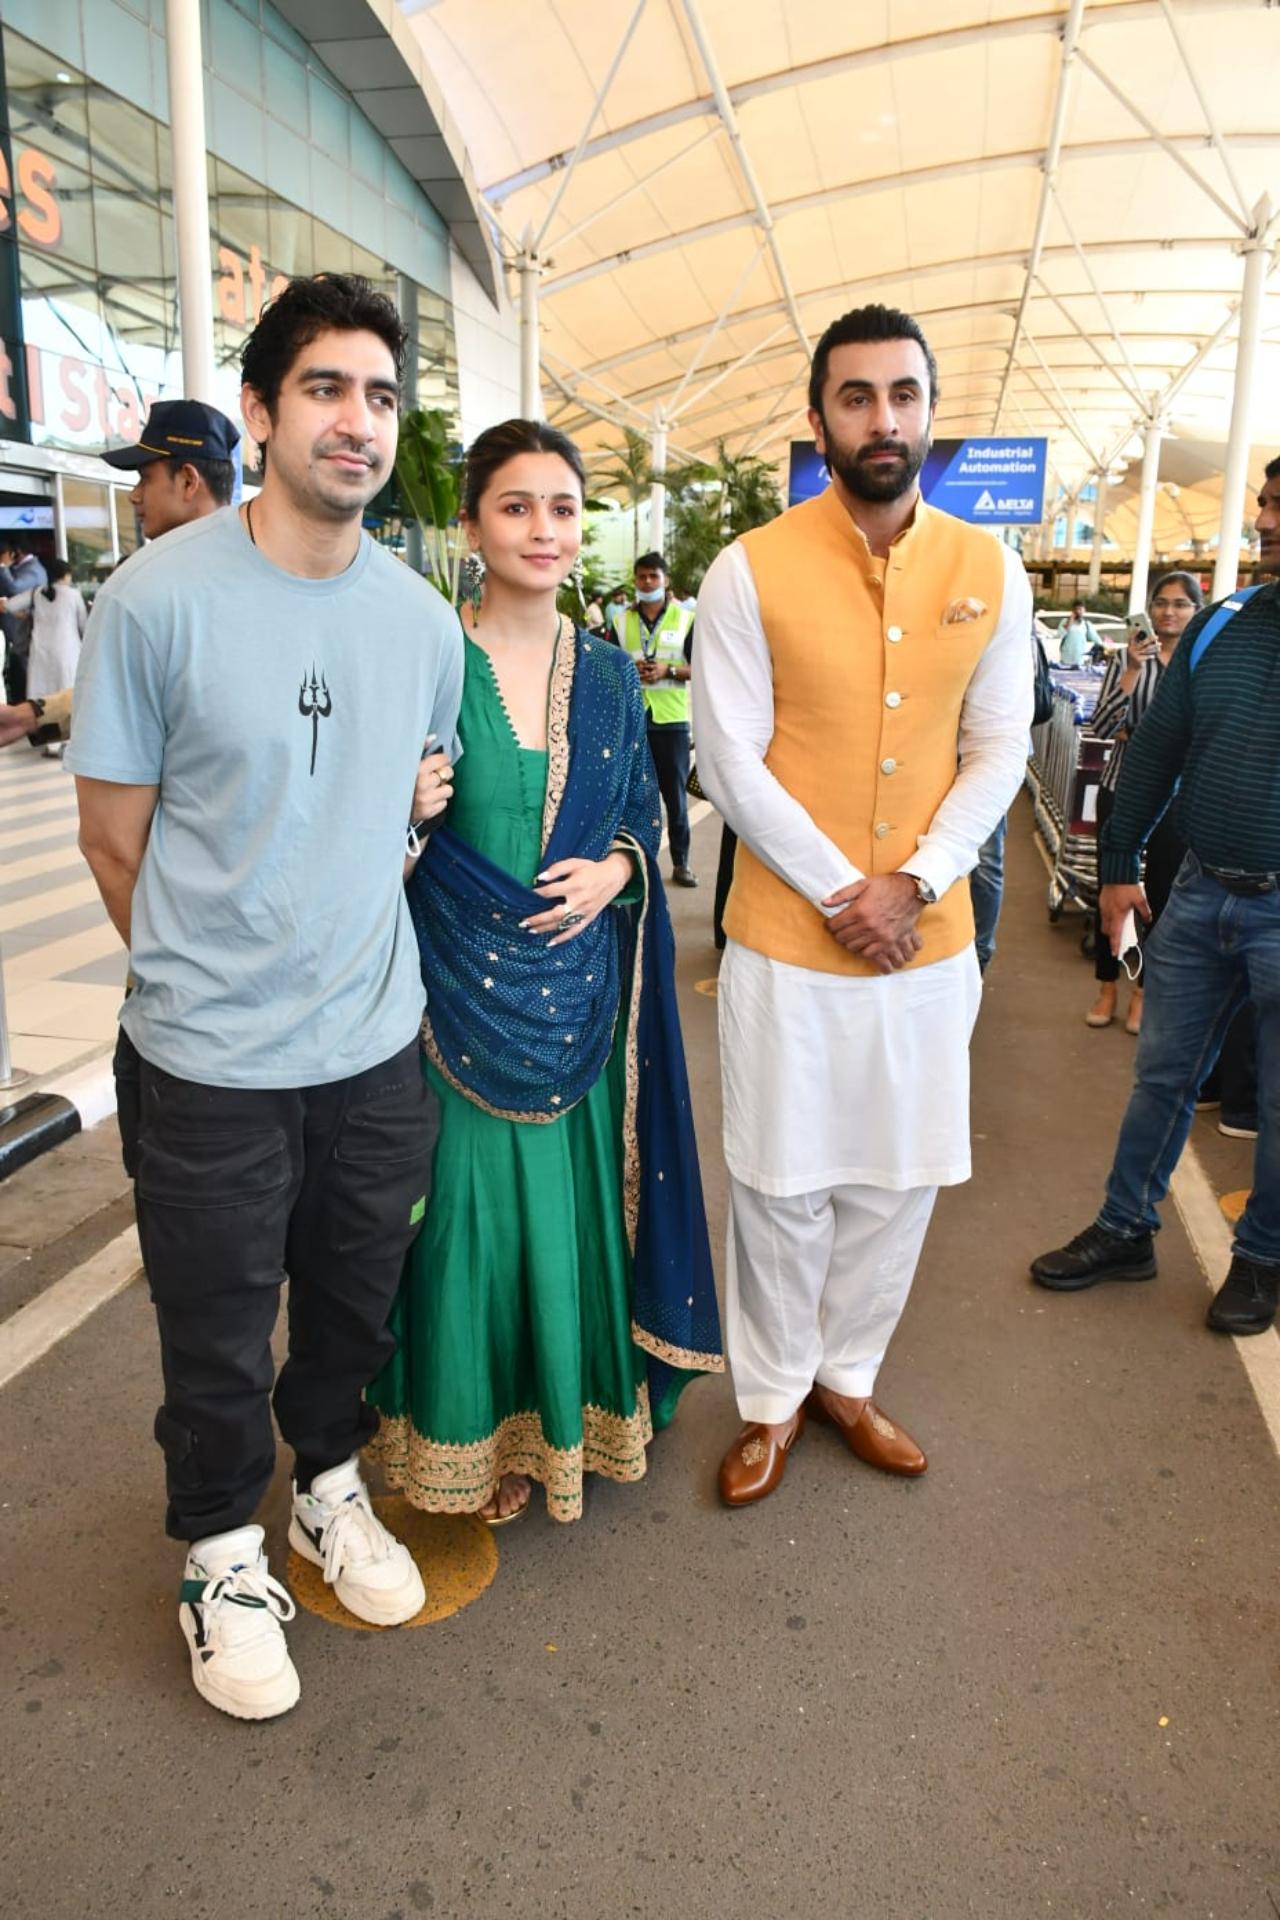 The soon-to-be parents looked ethereal in Indian ensembles. While Alia had donned a dark green Anarkali suit with a dark blue dupatta, Ranbir was wearing a white Kurta Pajama paired with a yellow waistcoat. Ayan opted for a casual look as he was dressed in a pale blue t-shirt with Lord Shiva's 'Trishul' printed on it